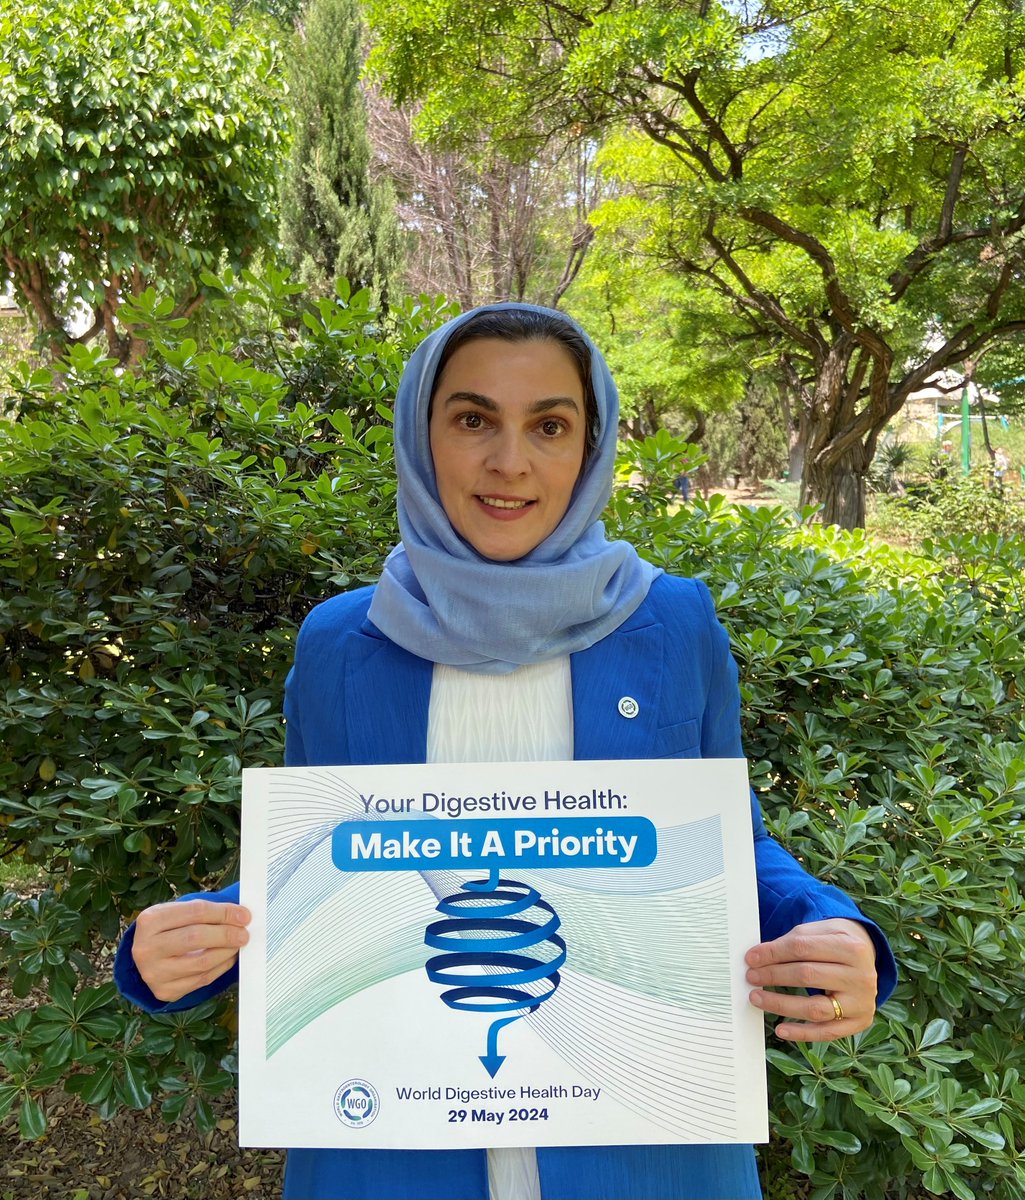 Prof. Anahita Sadeghi from Iran knows how to make their digestive health a priority! The #WDHD2024 campaign is about putting you and your gut health first! For more information on prioritizing your digestive health, visit wdhd.worldgastroenterology.org #YourDigestiveHealth